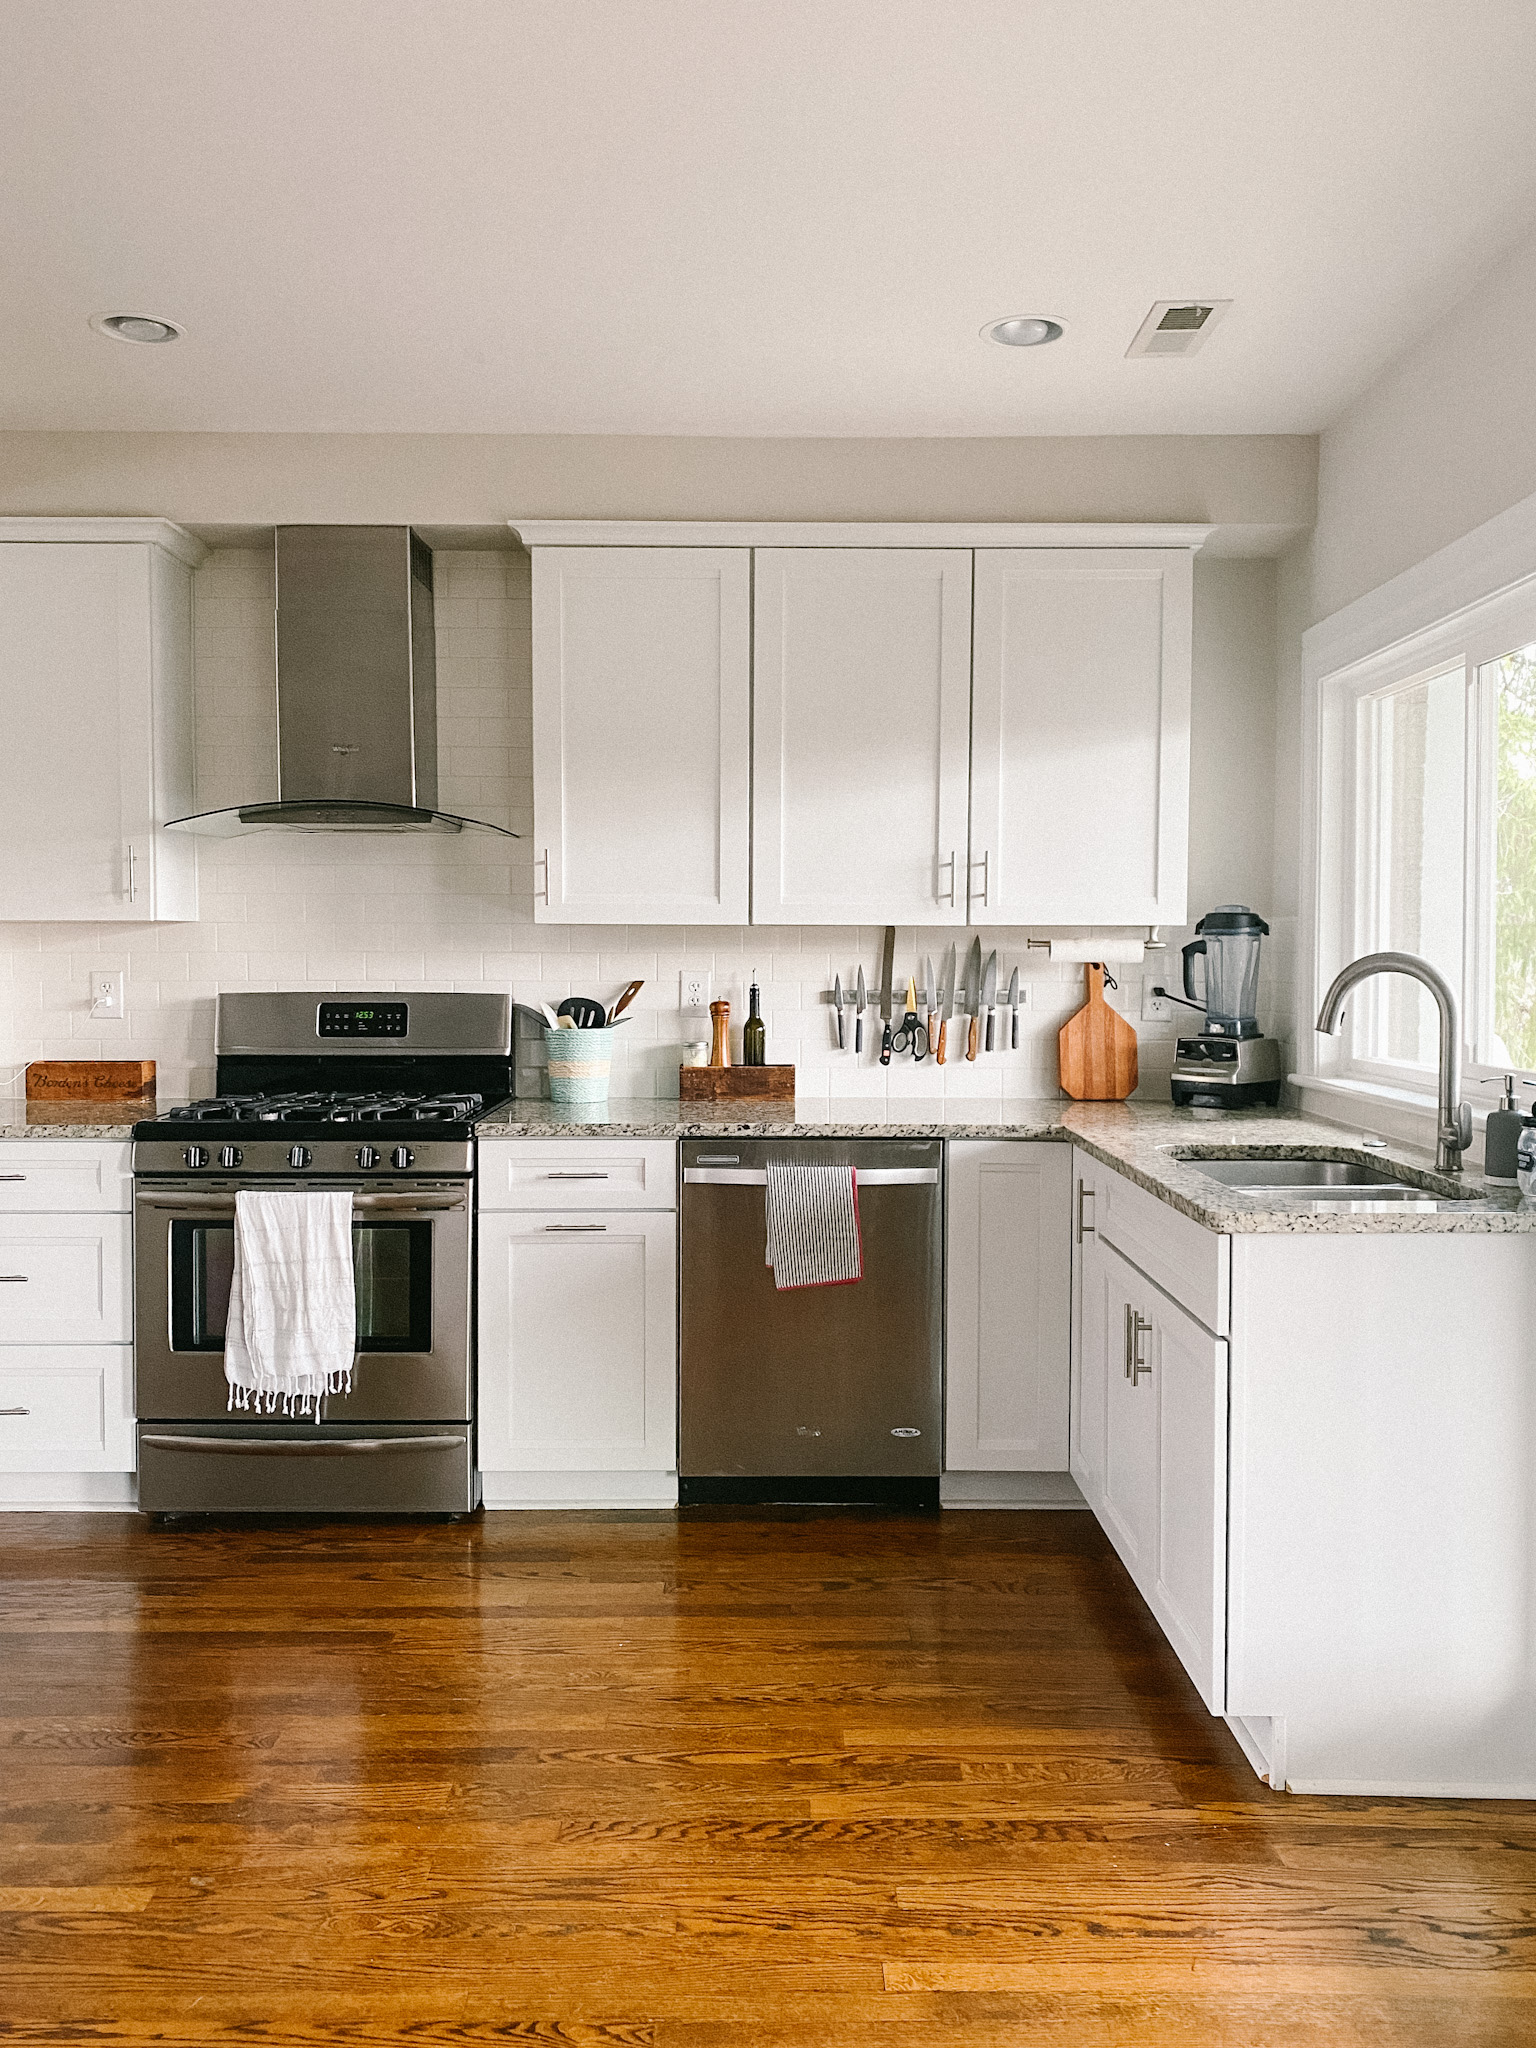 4 Simple Steps to Clutter-Free Kitchen Counters - Clean Mama